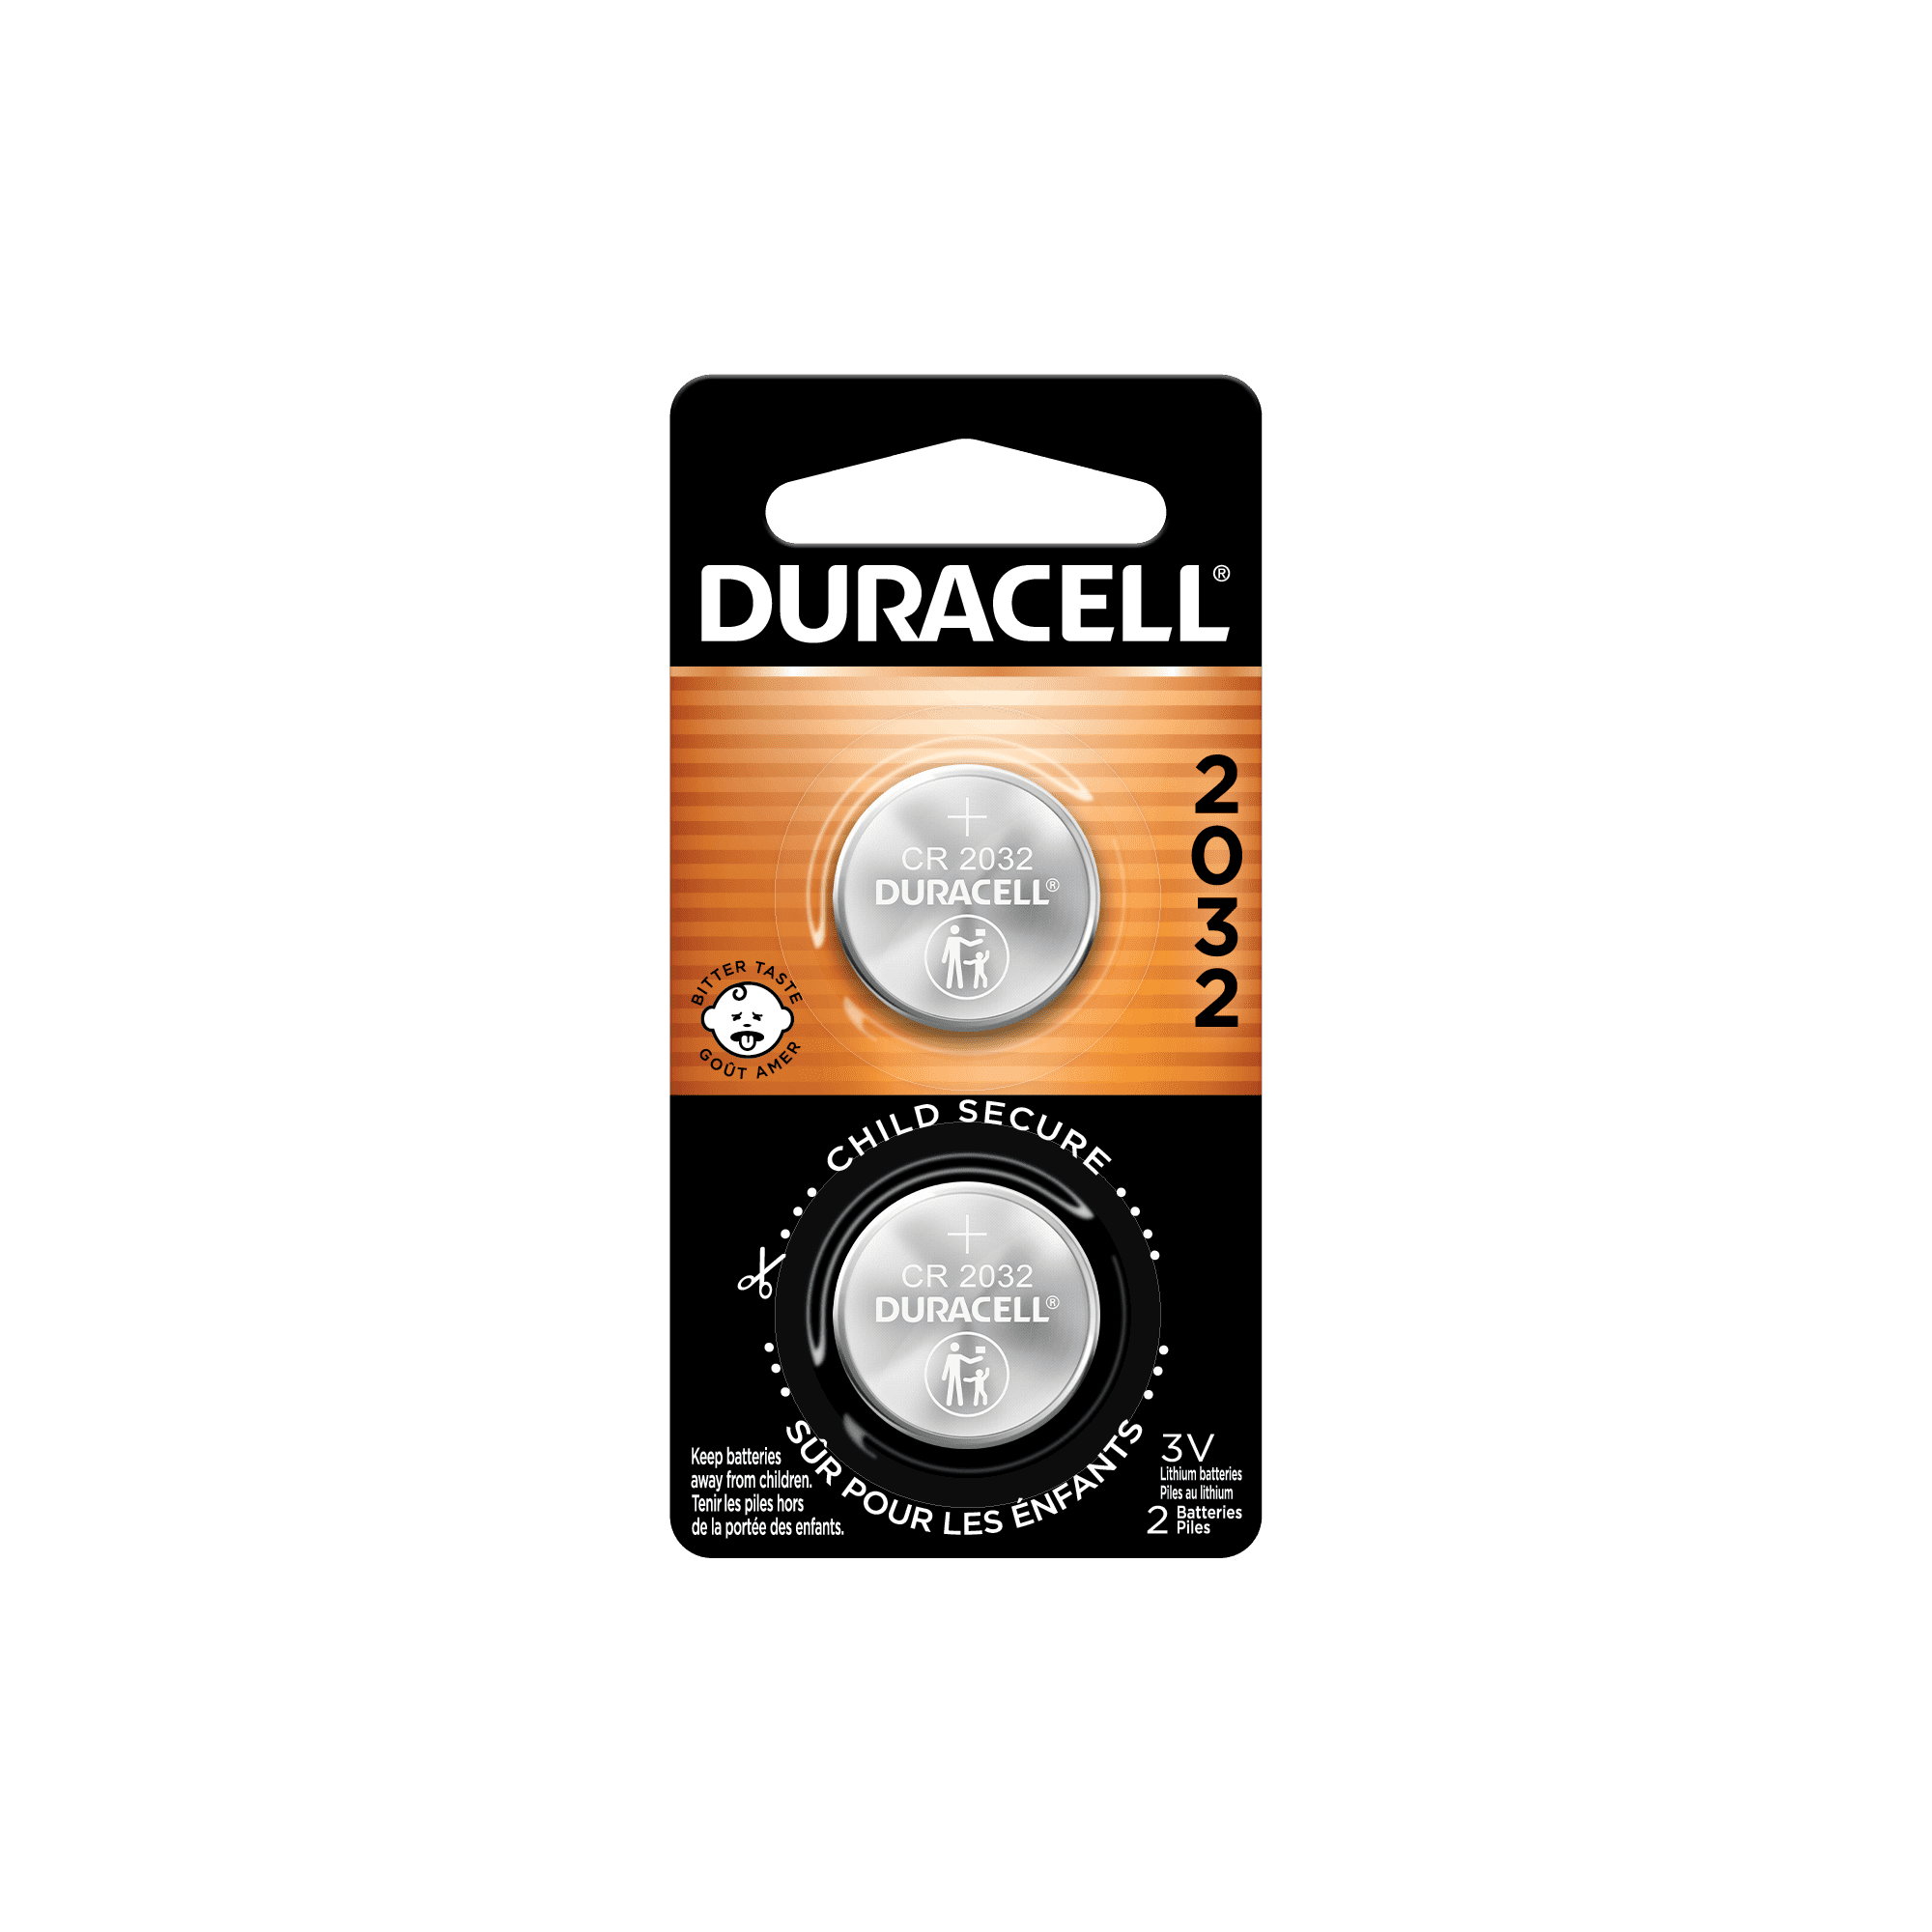 Duracell 2032 Lithium Coin Battery 3V, CR2032 Battery, Bitter Coating Discourages Swallowing, 2 Pack